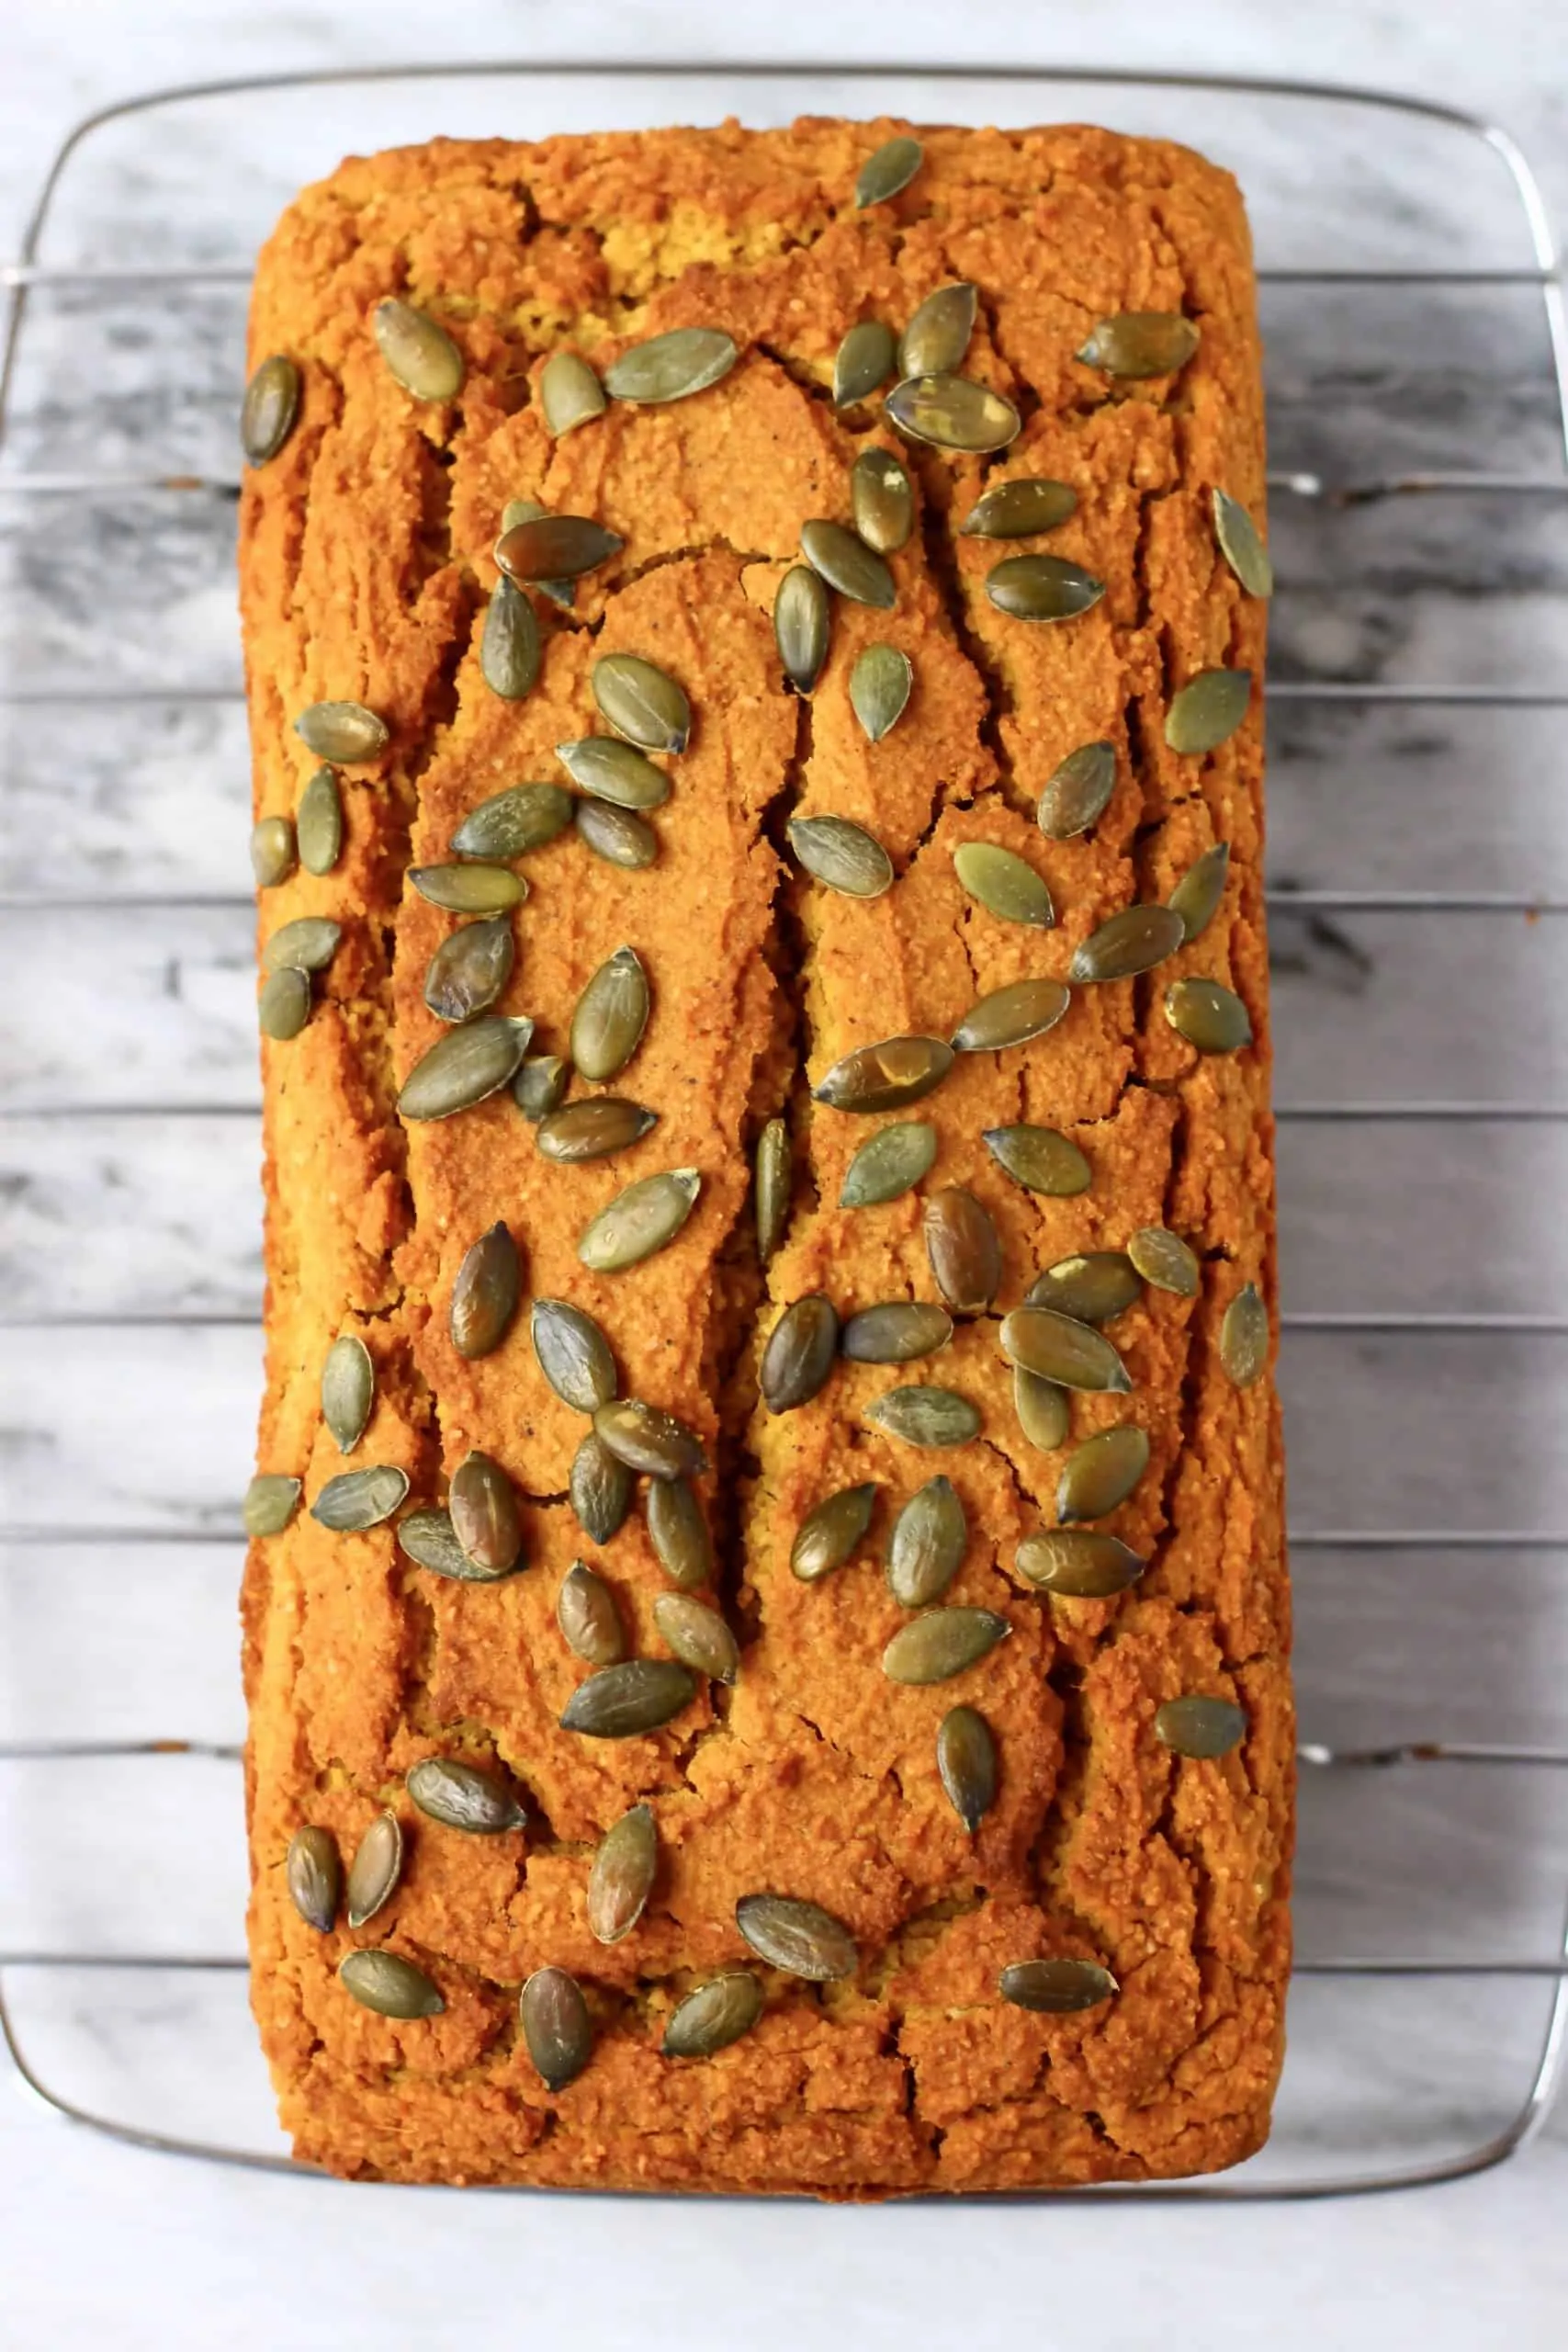 A loaf of gluten-free vegan pumpkin bread topped with pumpkin seeds on a wire rack